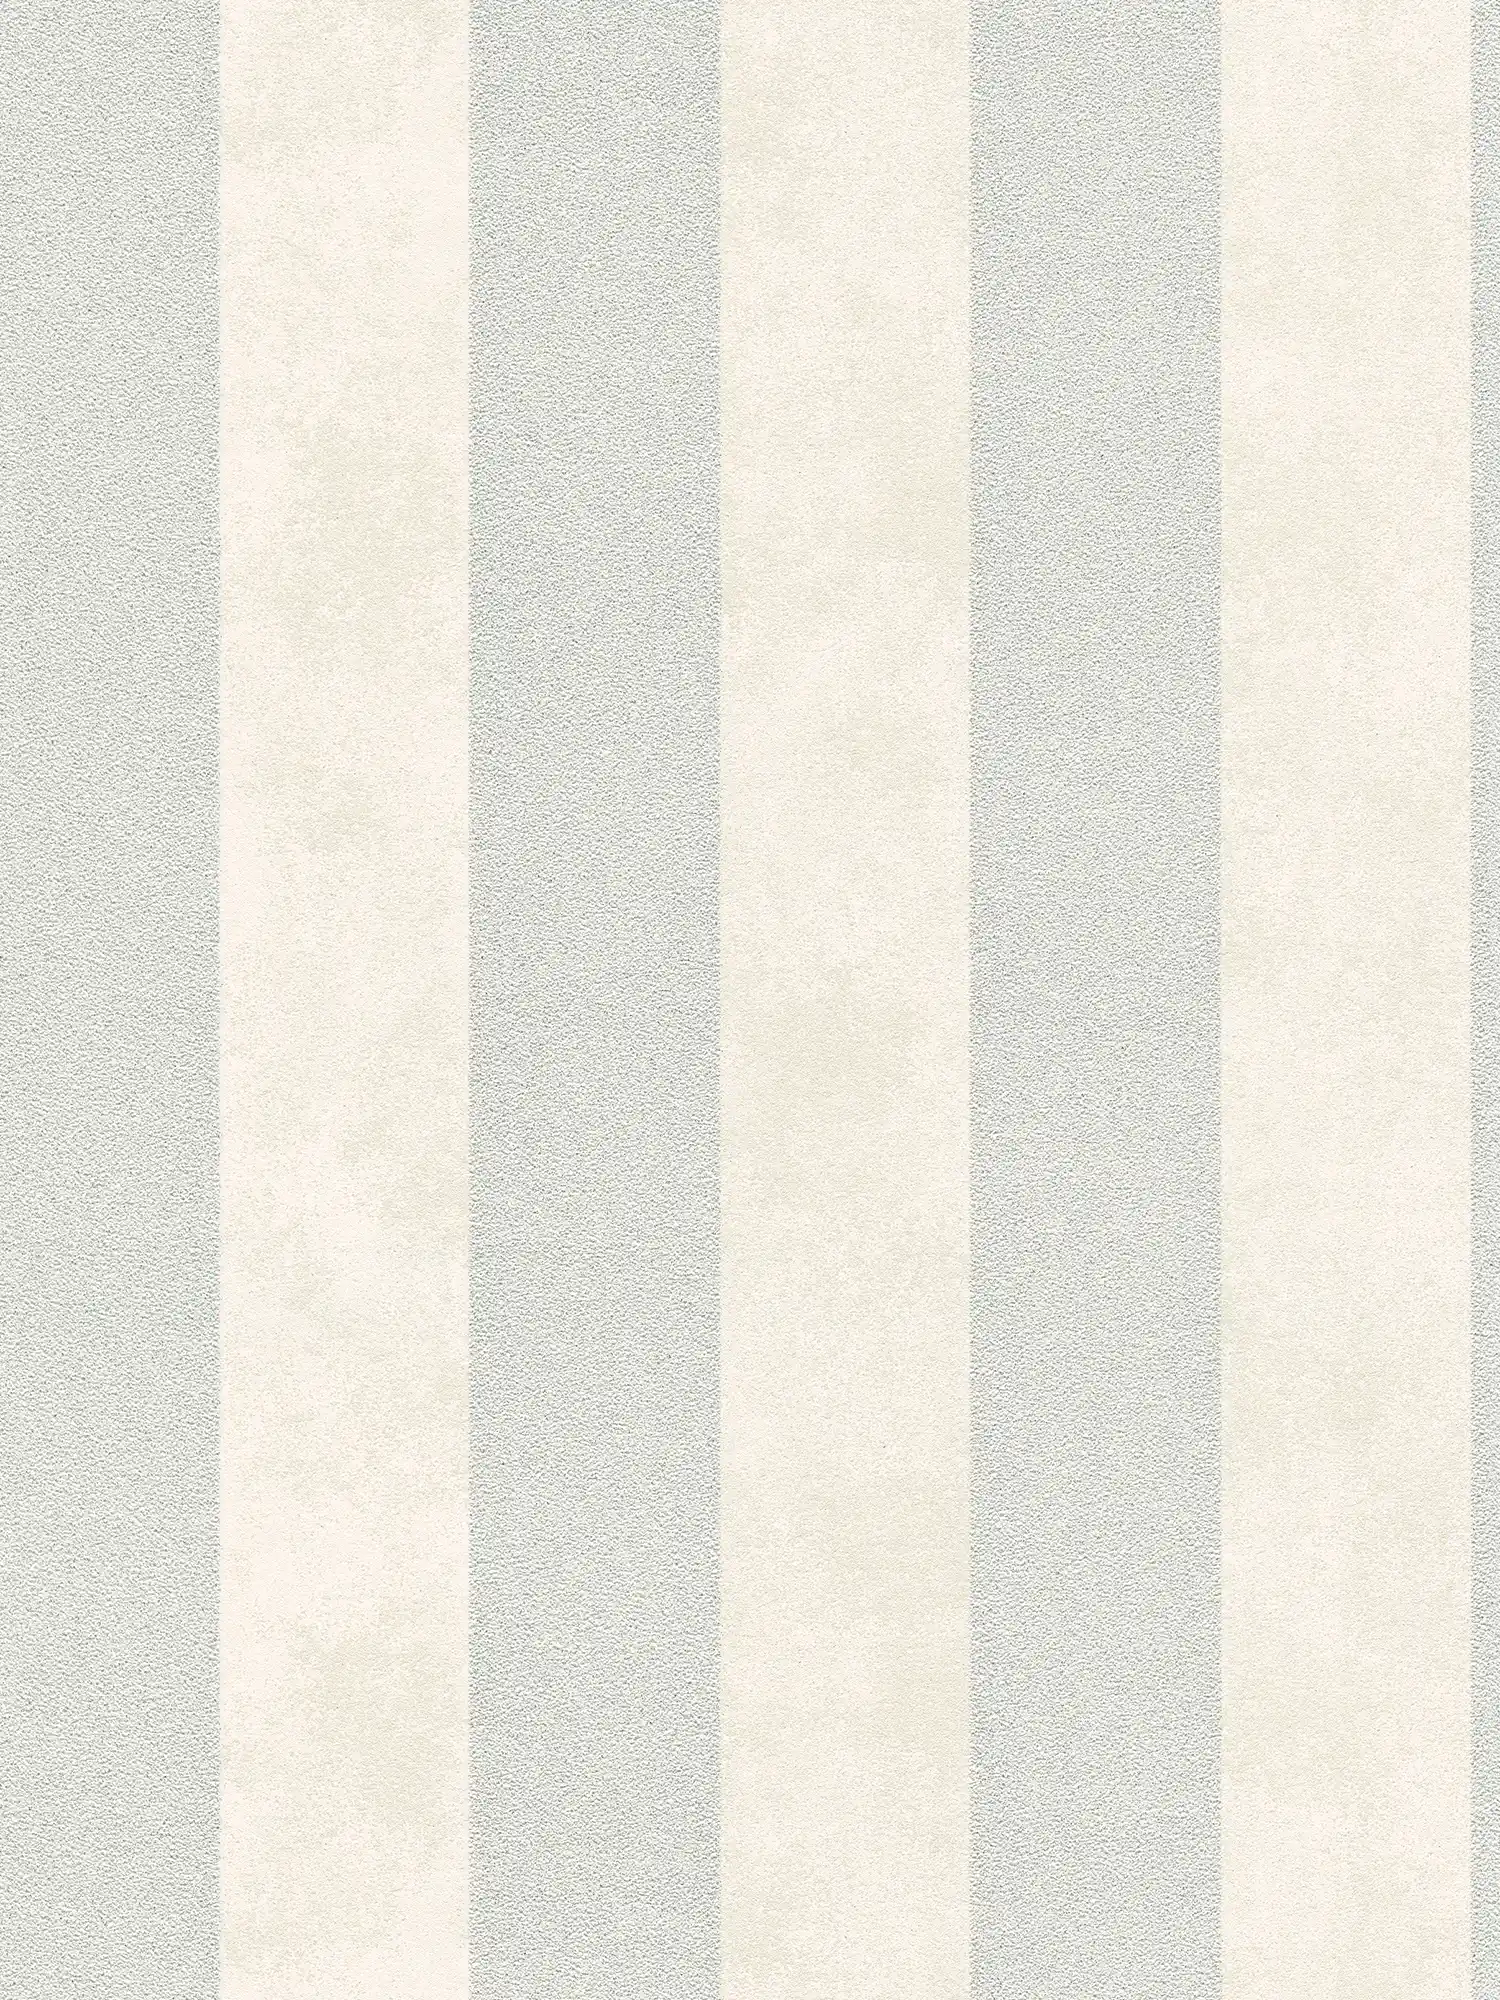 Block stripe wallpaper with colour and texture pattern - silver, grey, white
